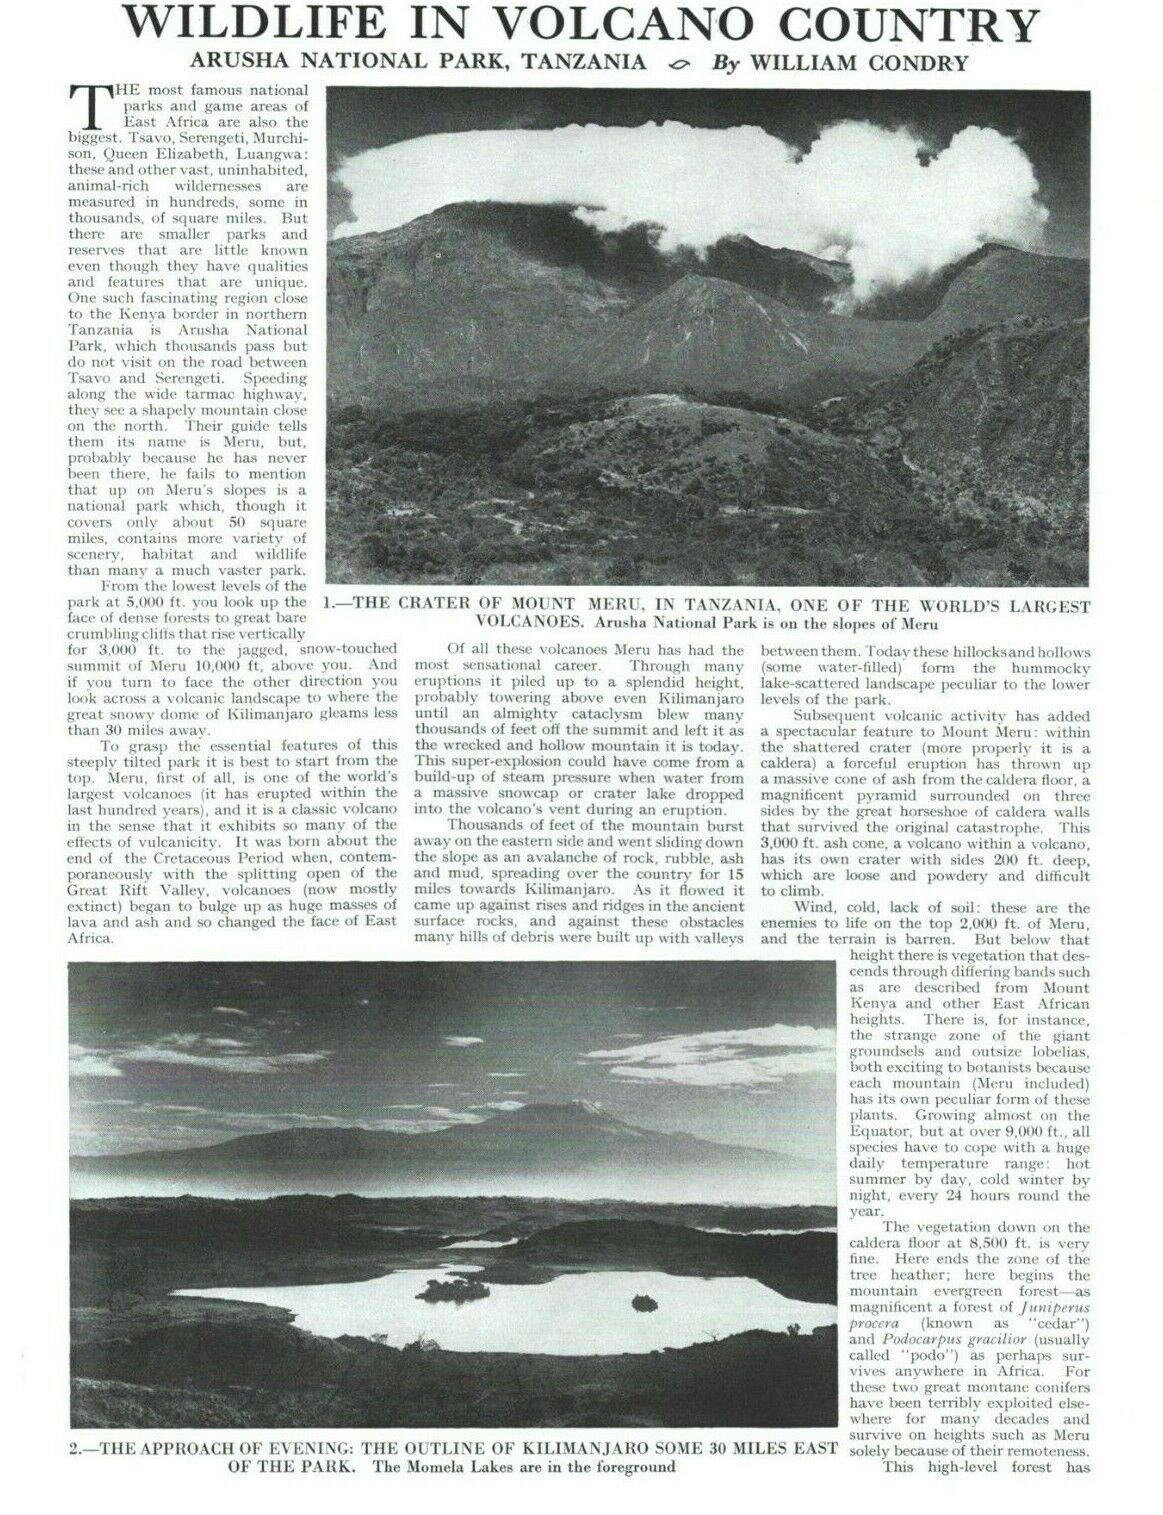 1971 Wildlife In Volcano Country Arusha National Park Tanzania - 2-Page Article